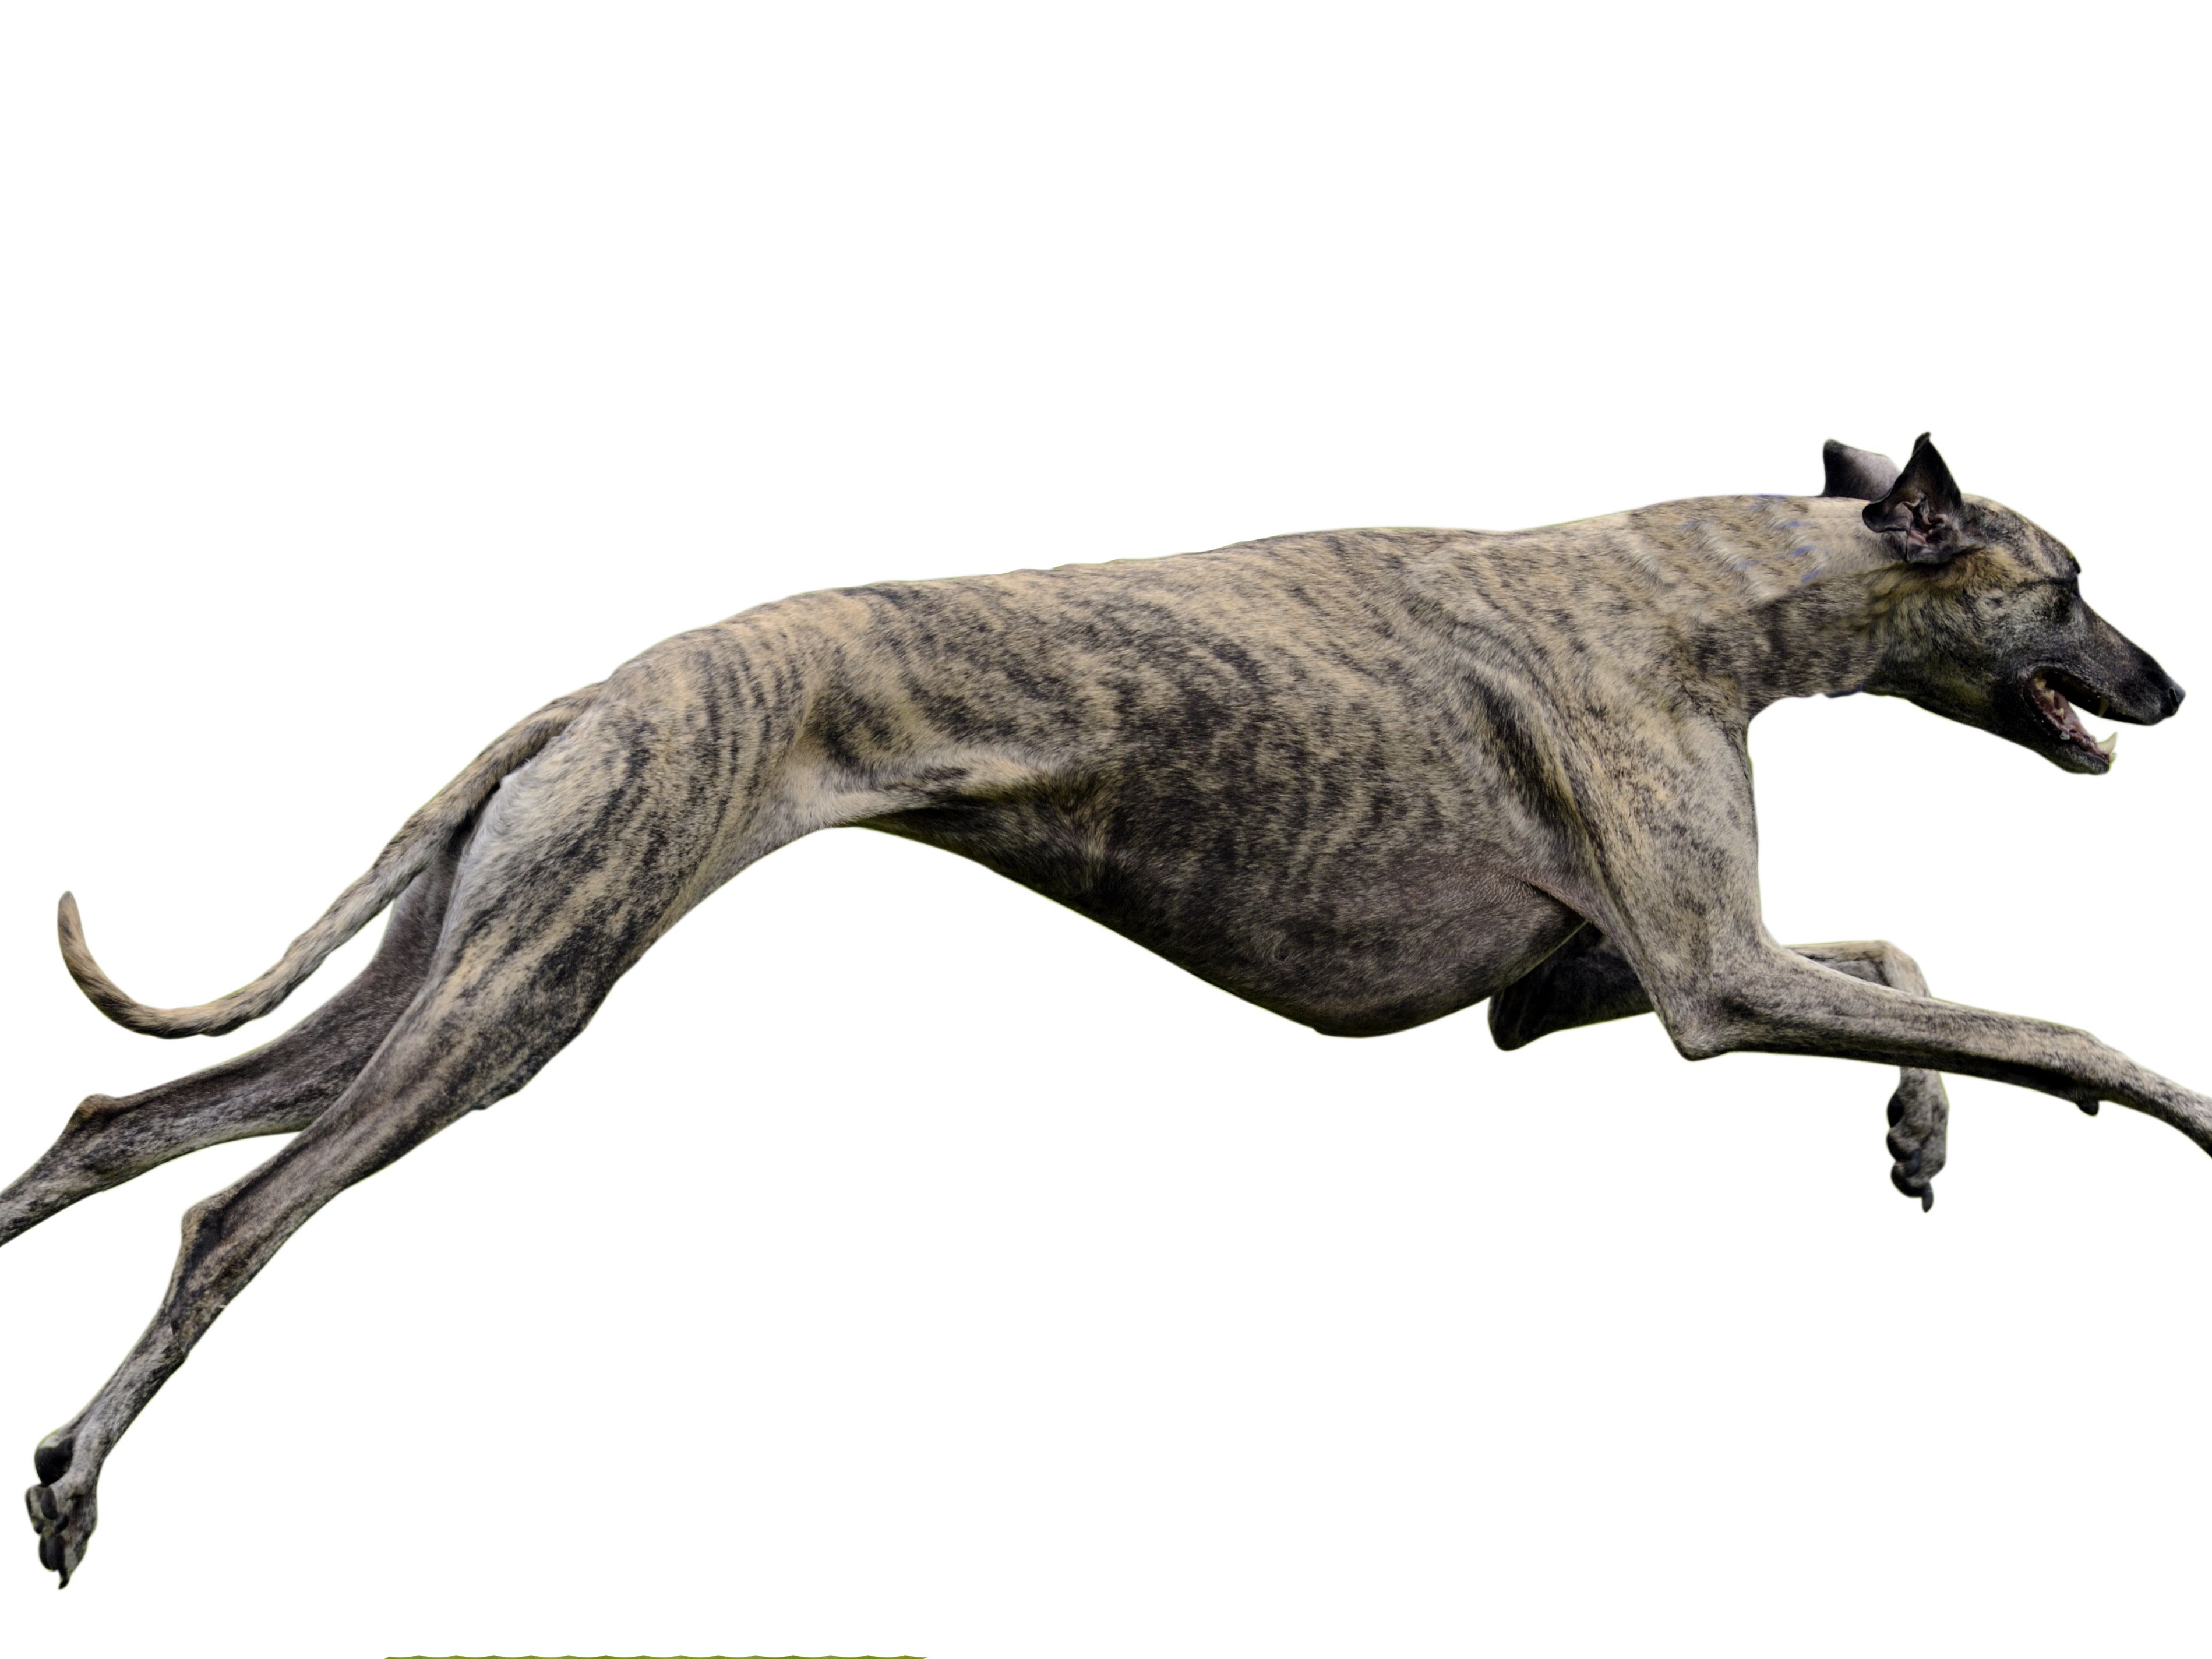 How fast can greyhounds run?